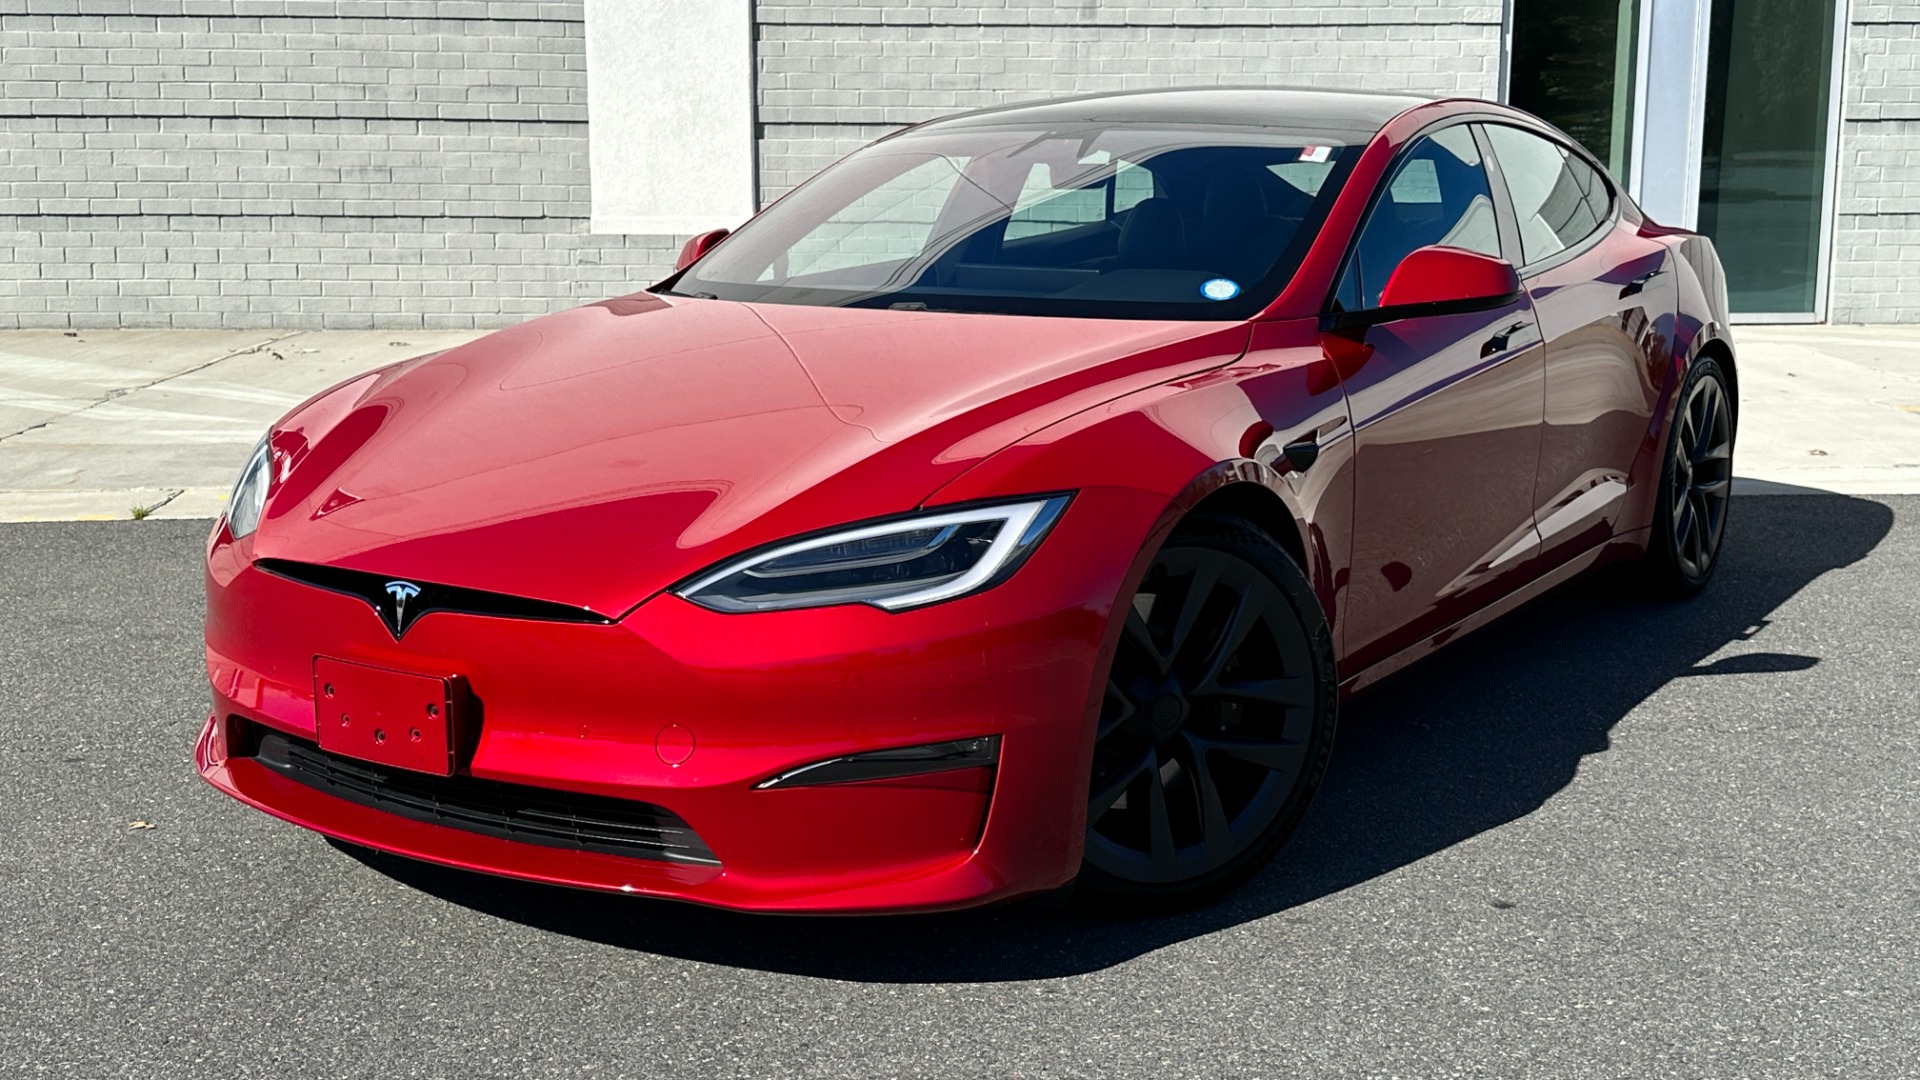 Used 2021 Tesla Model S PLAID / FULL SELF DRIVING / STANDARD CONNECTIVITY / CHARING CABLE / CARBON  for sale $117,995 at Formula Imports in Charlotte NC 28227 2